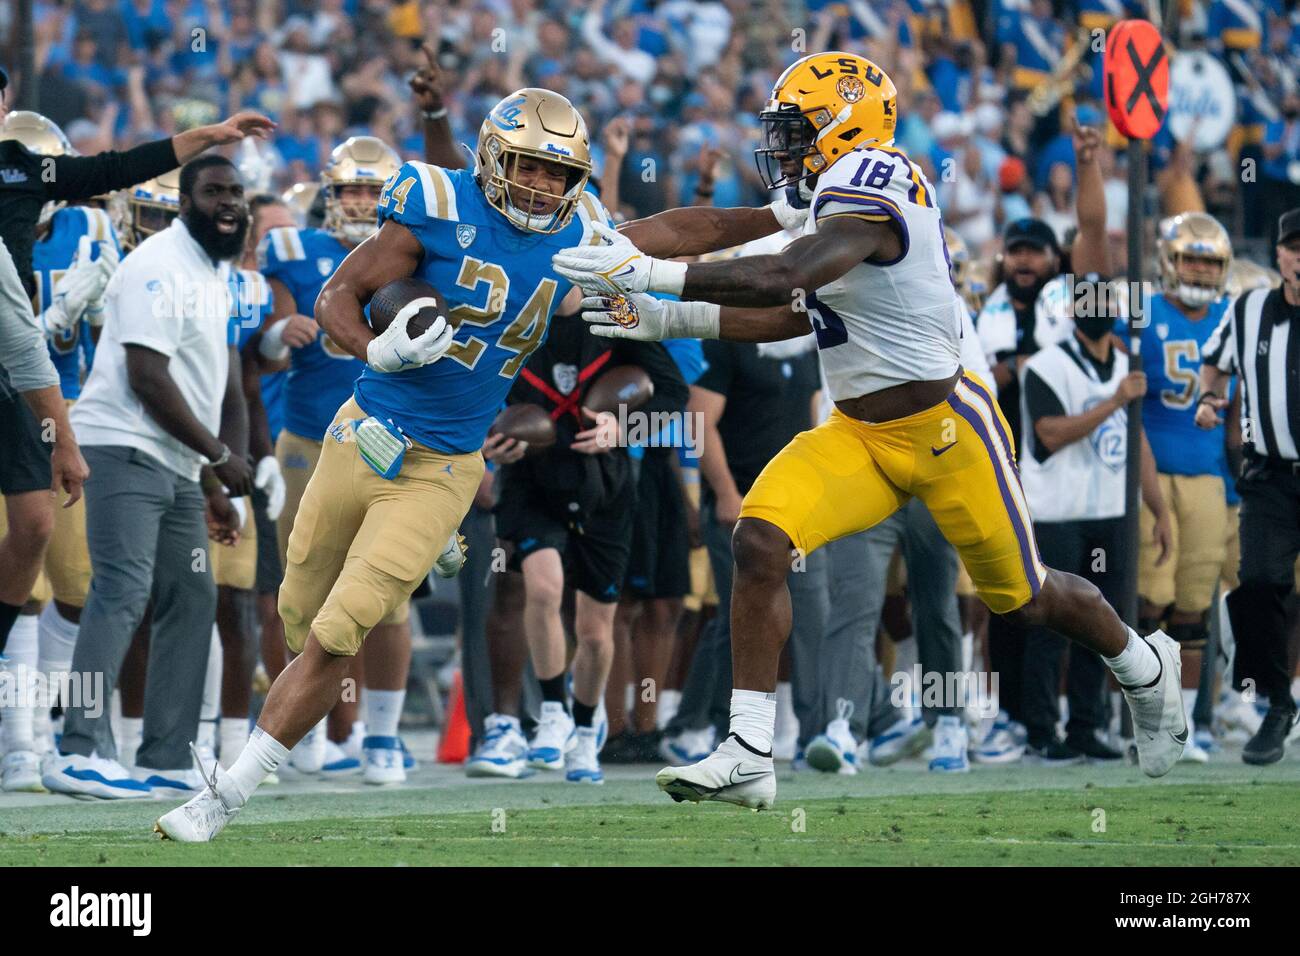 UCLA Bruins running back Zach Charbonnet (24) tries to escape LSU Tigers linebacker Damone Clark (18) during a NCAA football game against the LSU Tige Stock Photo